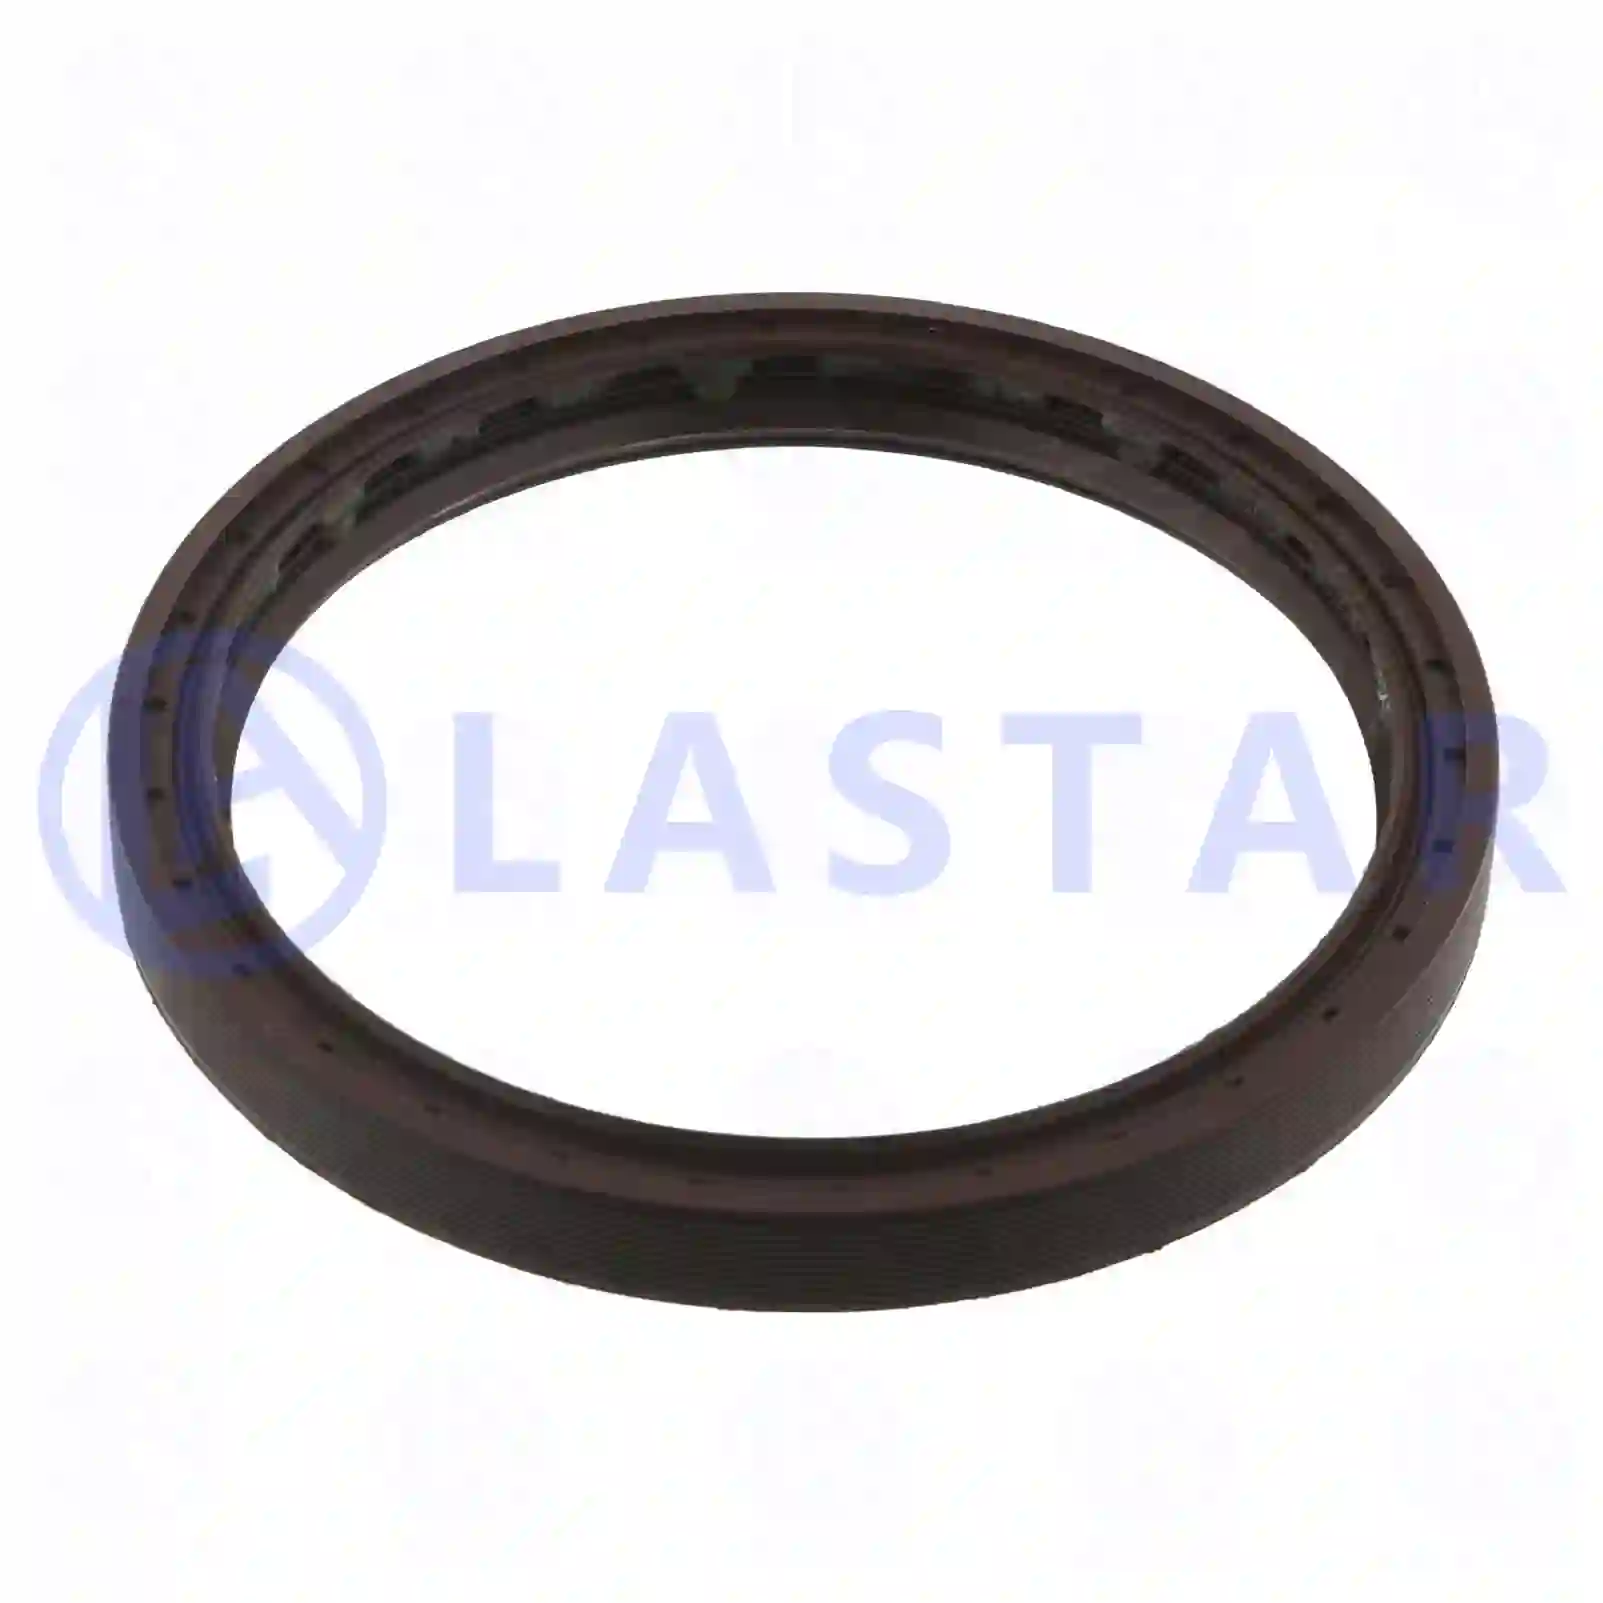 Oil seal, 77726076, 1672249, , , , , ||  77726076 Lastar Spare Part | Truck Spare Parts, Auotomotive Spare Parts Oil seal, 77726076, 1672249, , , , , ||  77726076 Lastar Spare Part | Truck Spare Parts, Auotomotive Spare Parts